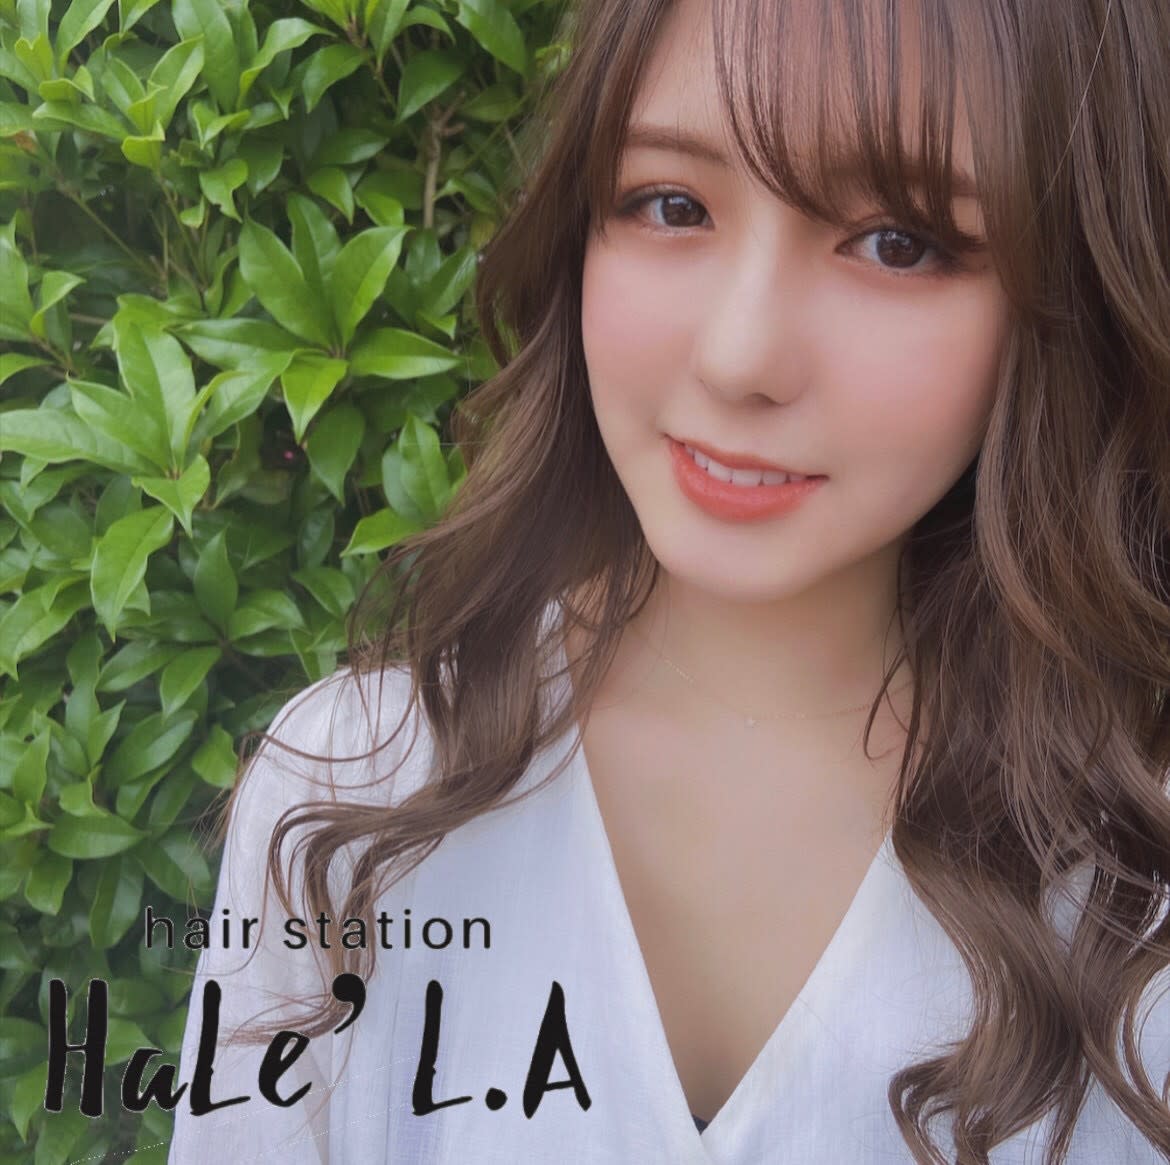 hair station HaLe' L.A【ヘアーステーションハレラ】のスタイル紹介。hair station HaLe' L.A×ロング